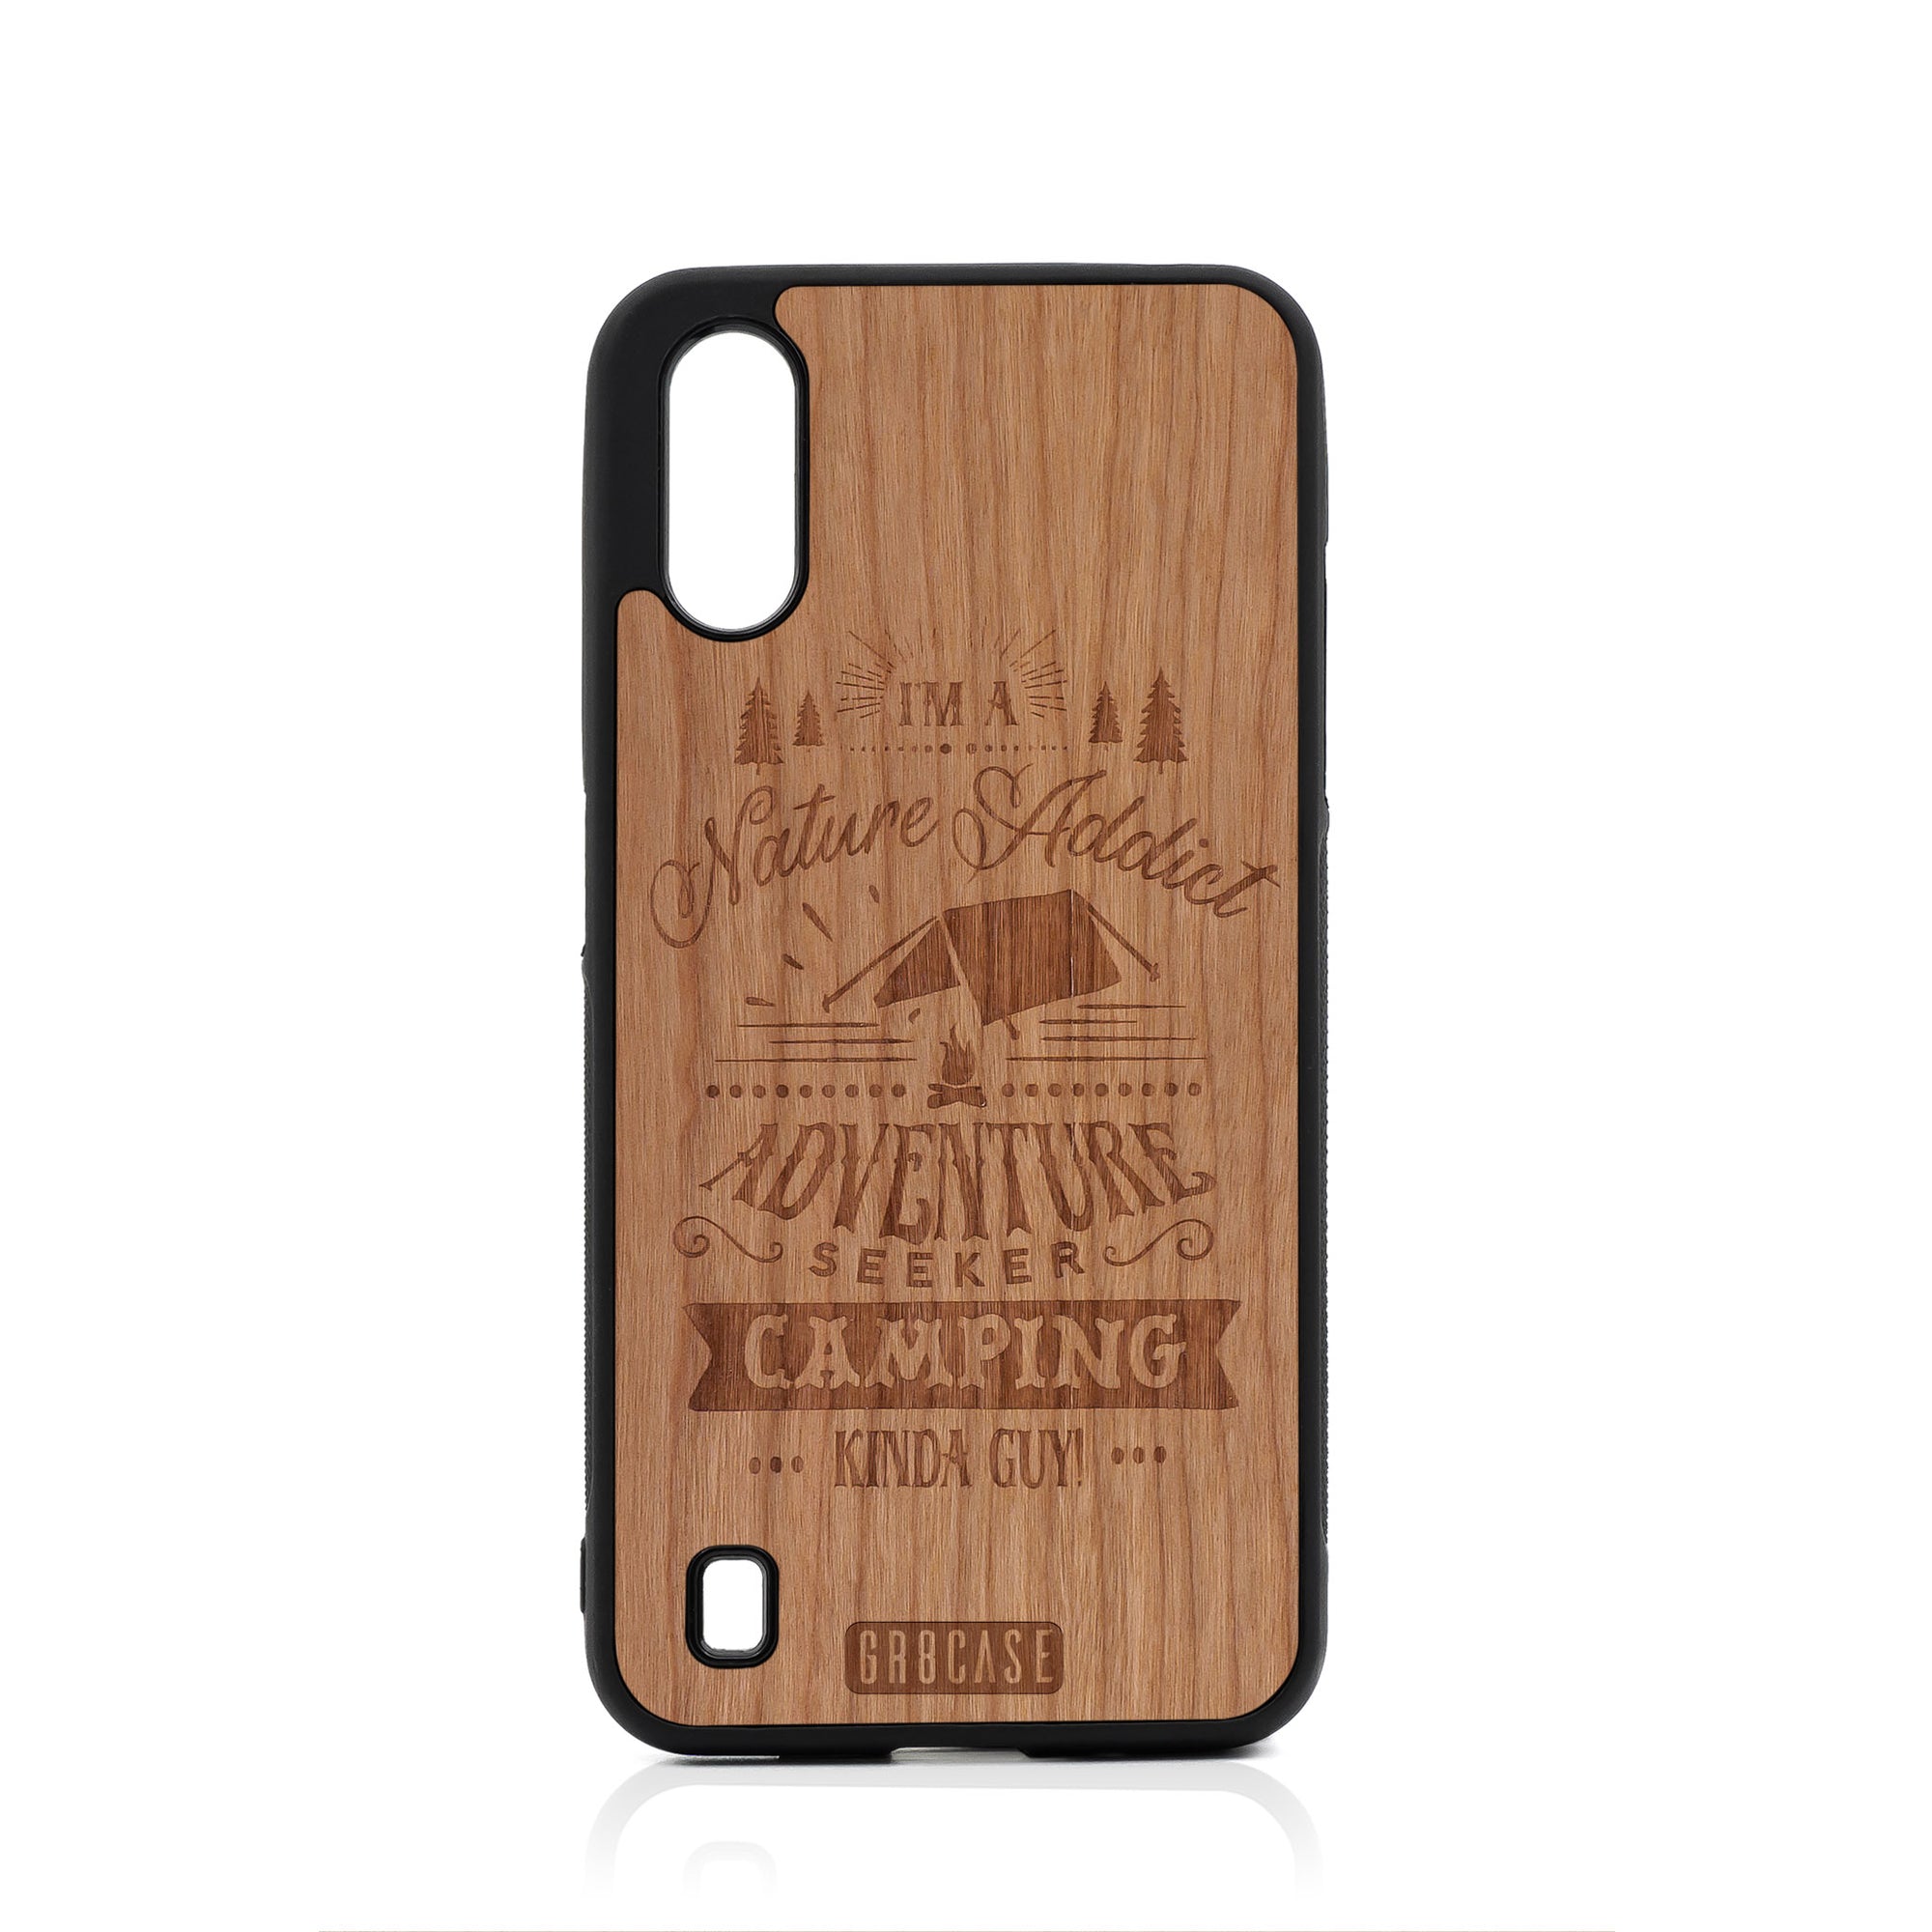 I'm A Nature Addict Adventure Seeker Camping Kinda Guy Design Wood Case For Samsung Galaxy A01